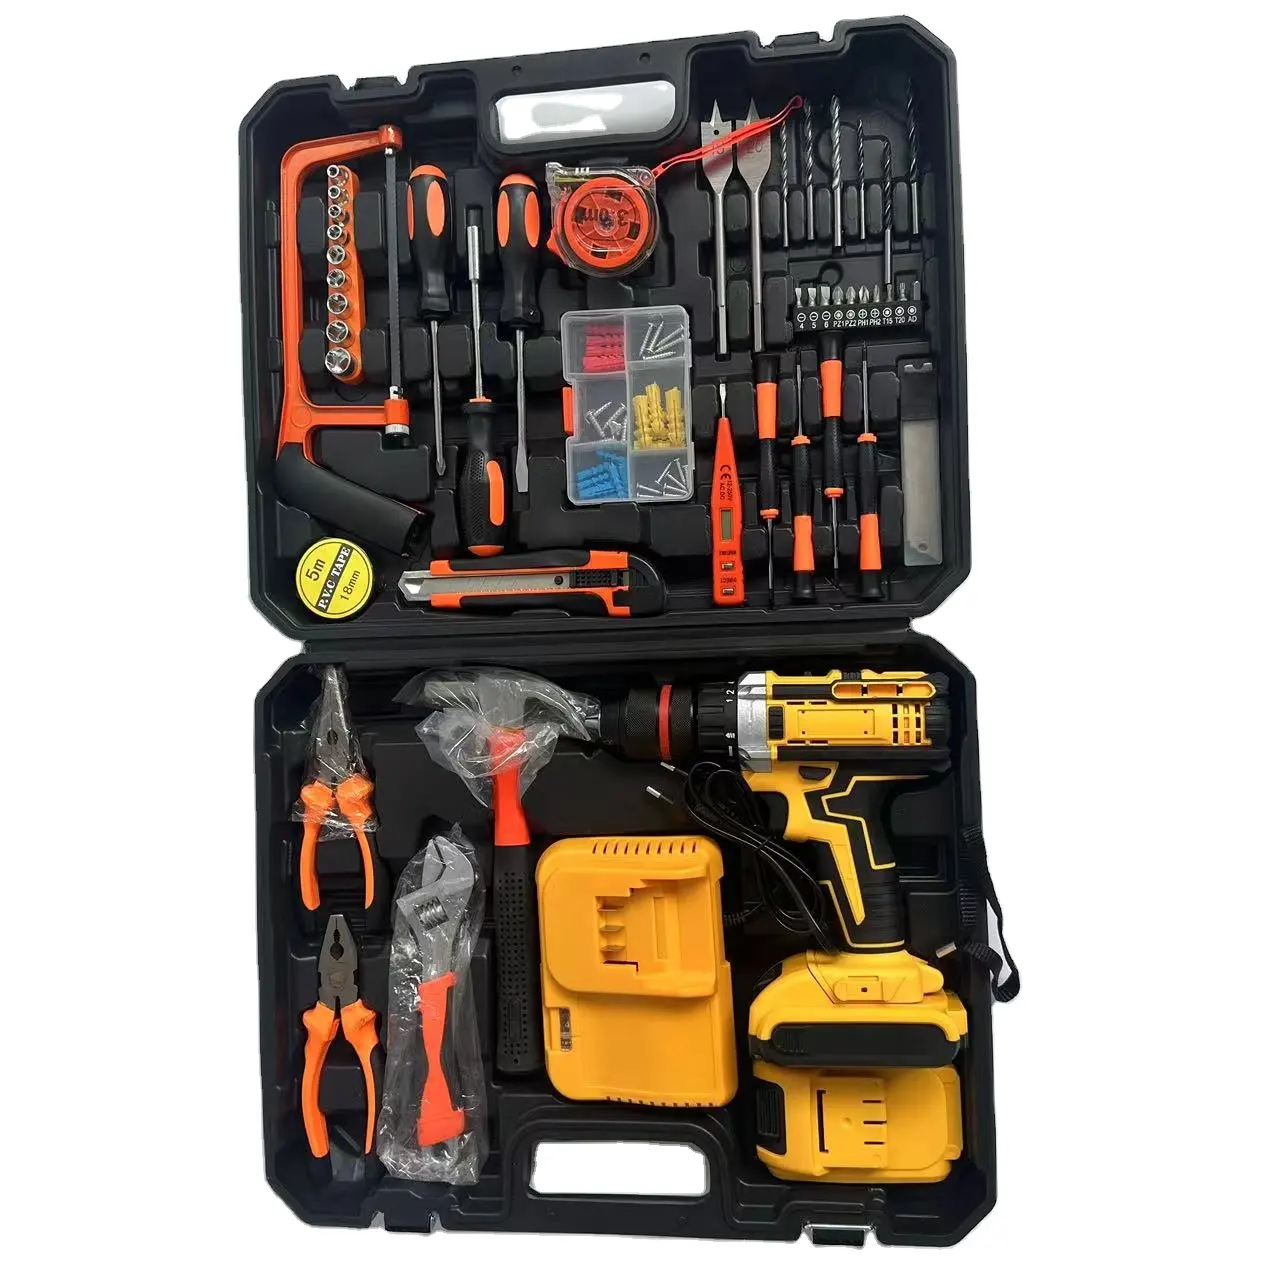 Electric tool set hardware impact drill hand electric drill lithium electric drill maintenance tool a complete set electricians